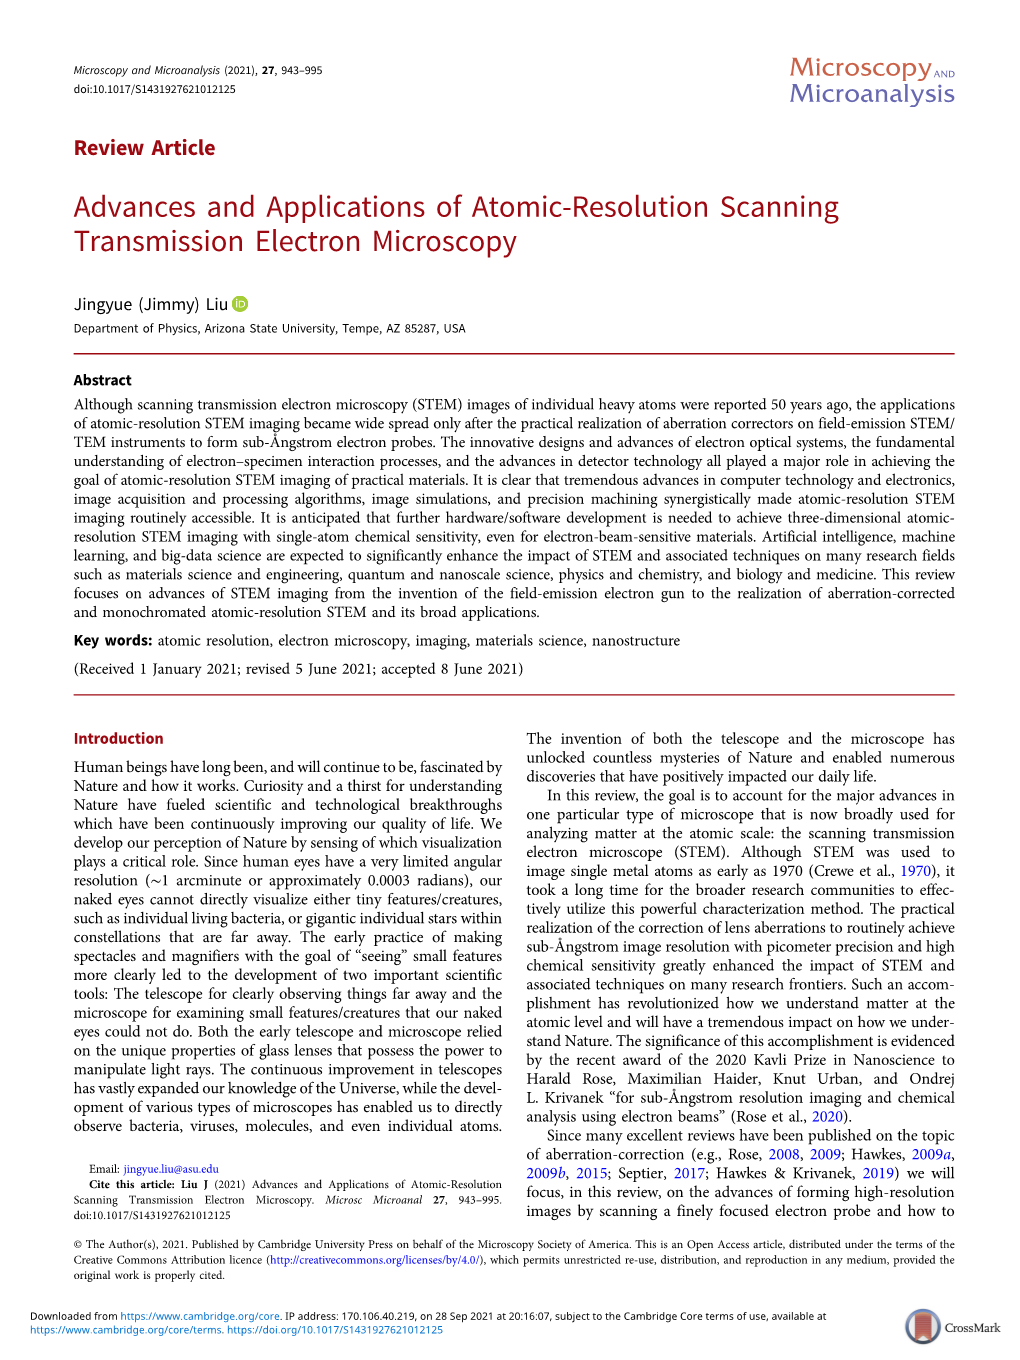 Advances and Applications of Atomic-Resolution Scanning Transmission Electron Microscopy